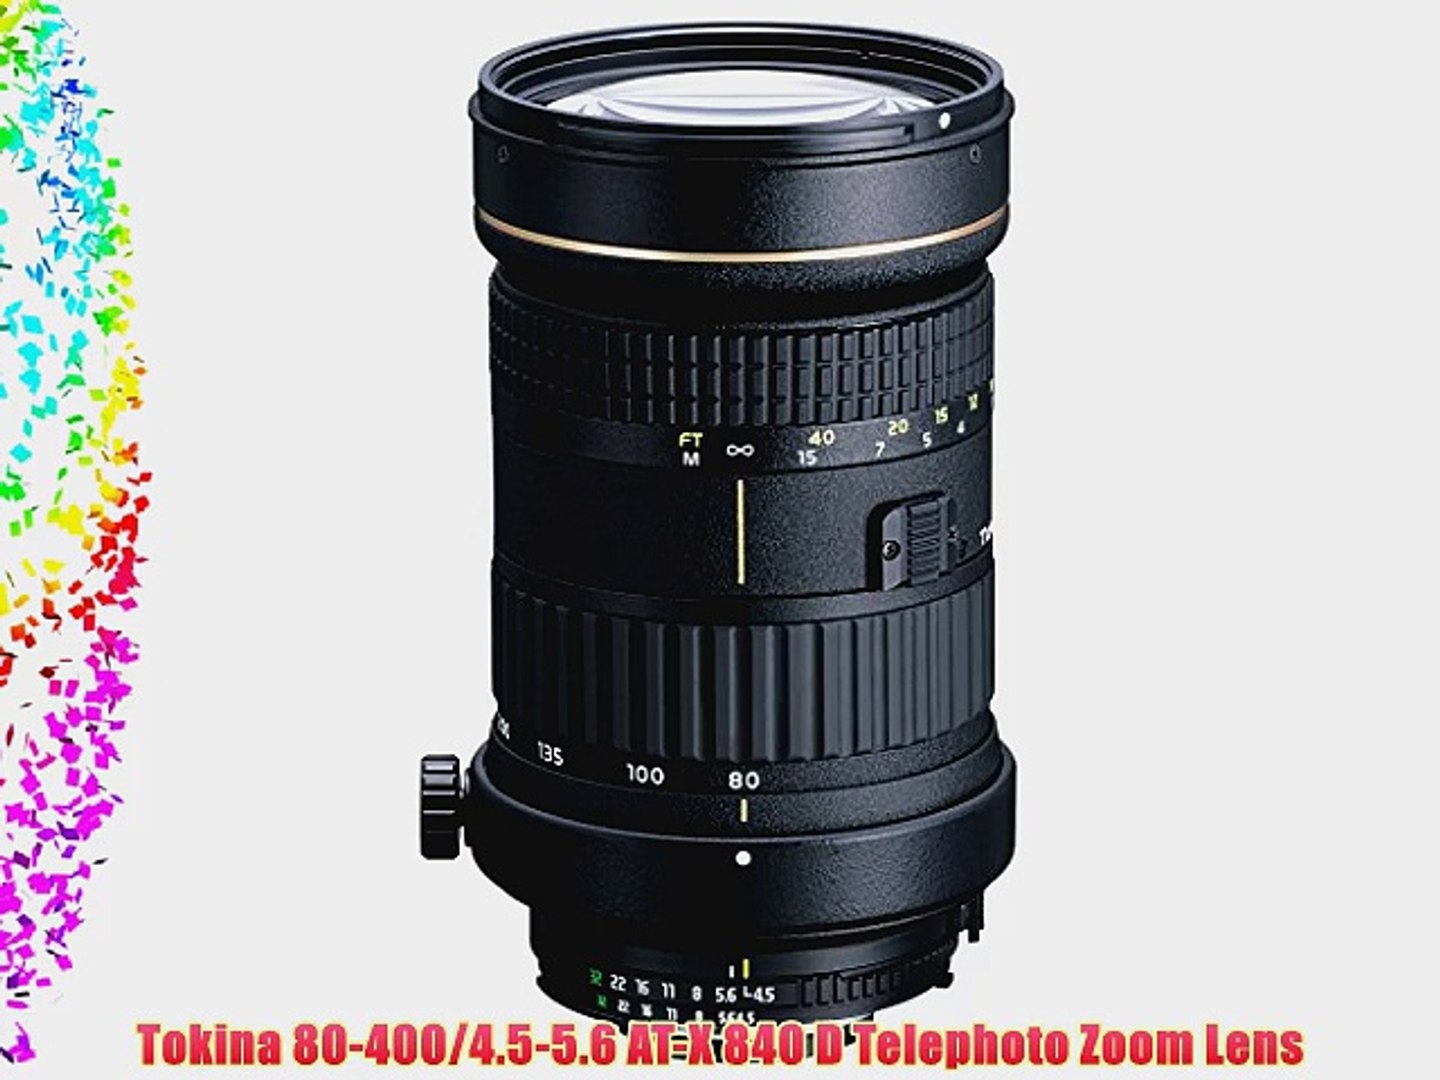 Tokina 80-400/4.5-5.6 AT-X 840 D Telephoto Zoom Lens - video